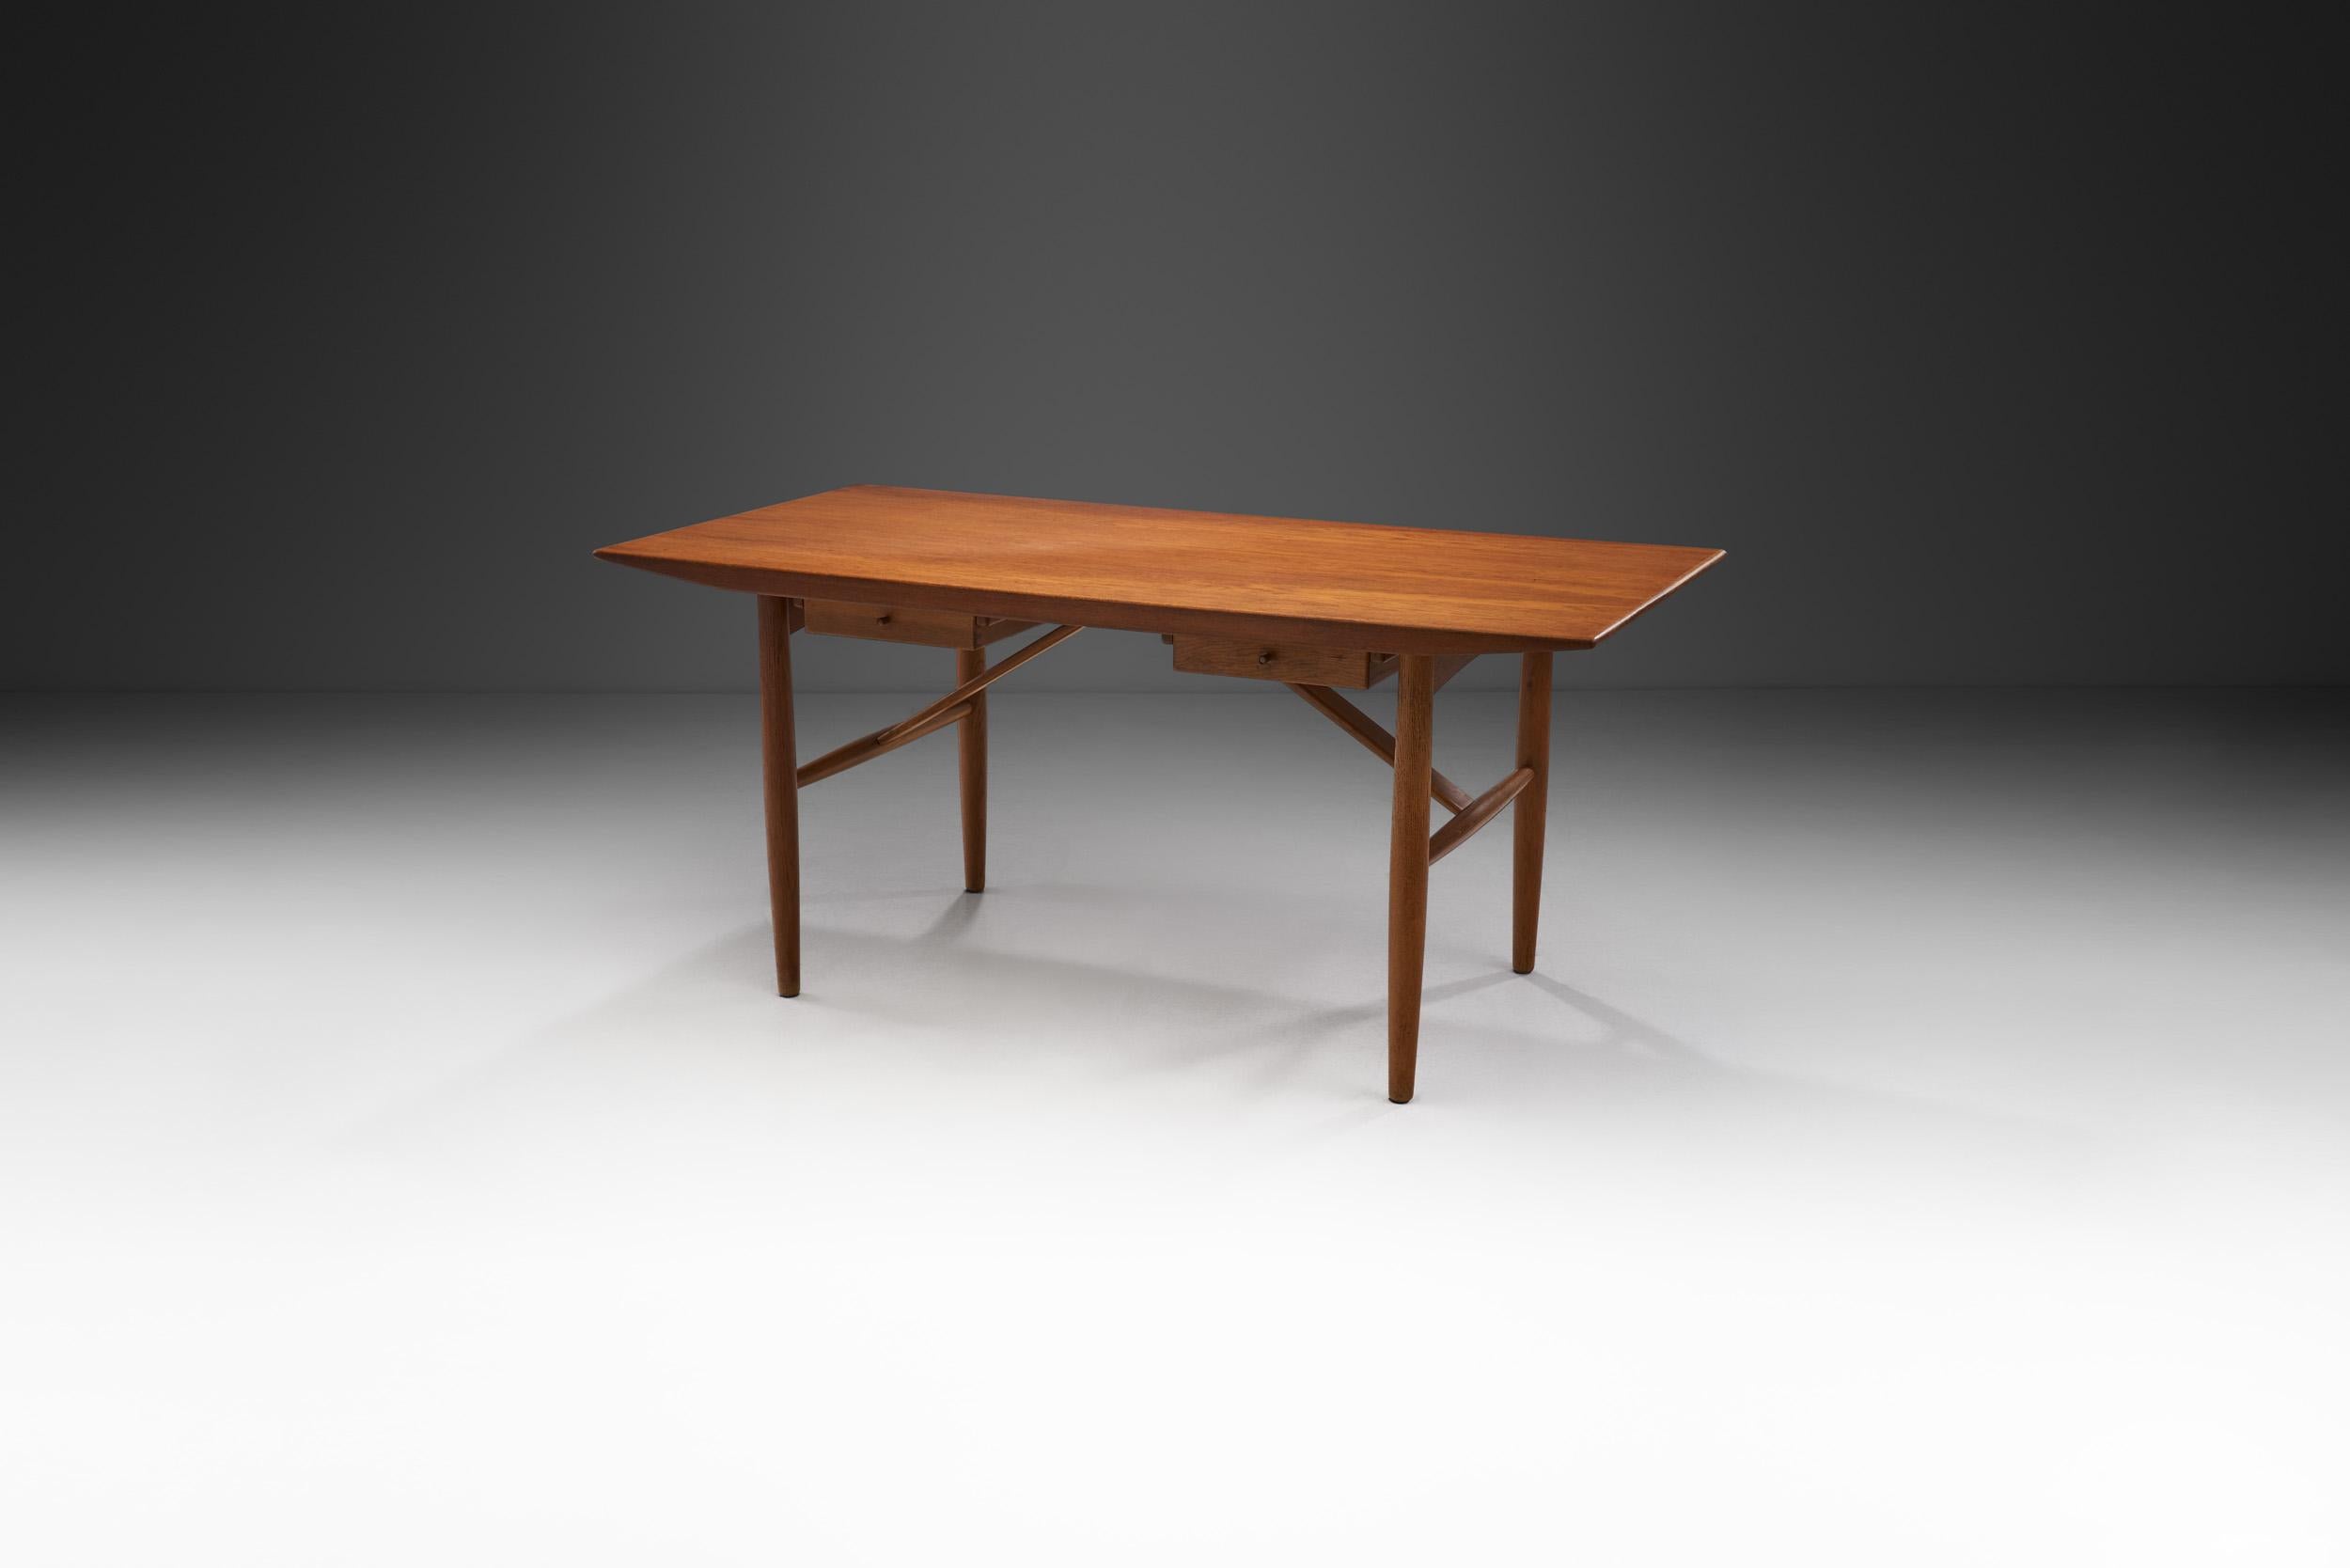 Firm believers in Functionalism, Danish designers and cabinetmakers avoided short-lived aesthetic trends alike, concentrating on crafting with quality materials instead. This desk is characterized by its functionalist design combined with a modern